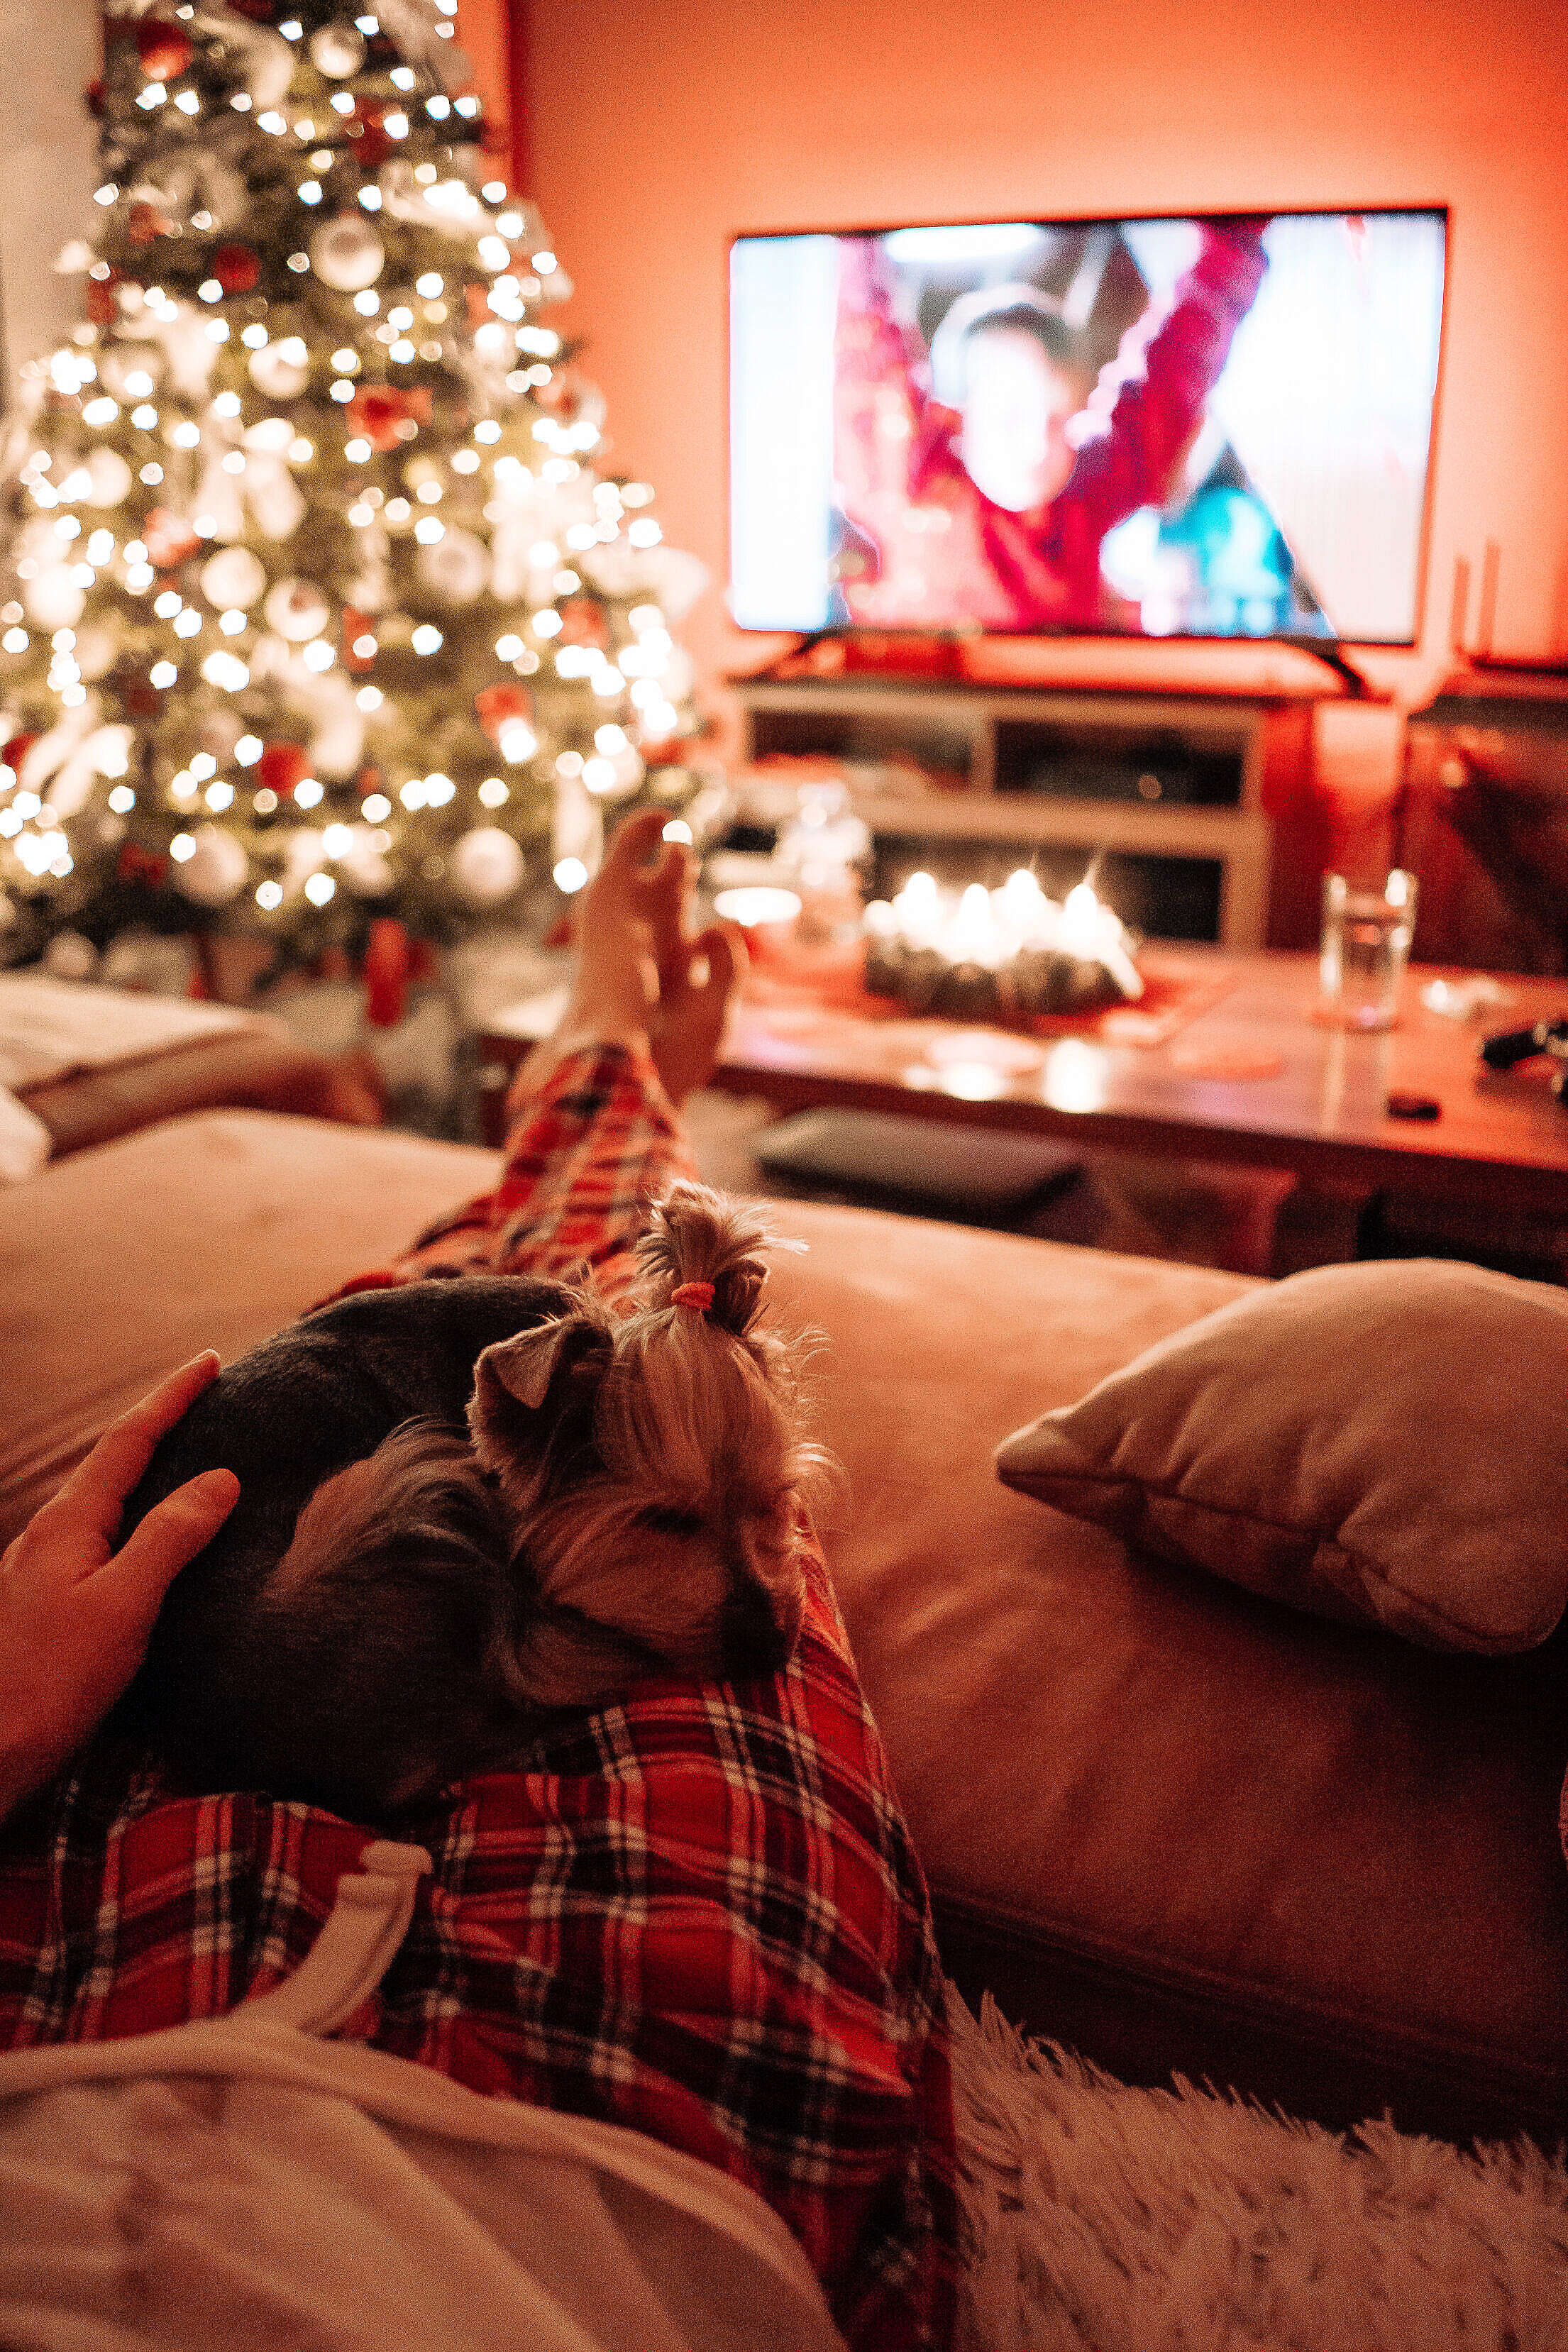 Man Relaxing on a Sofa with His Dog at Christmas Free Stock Photo